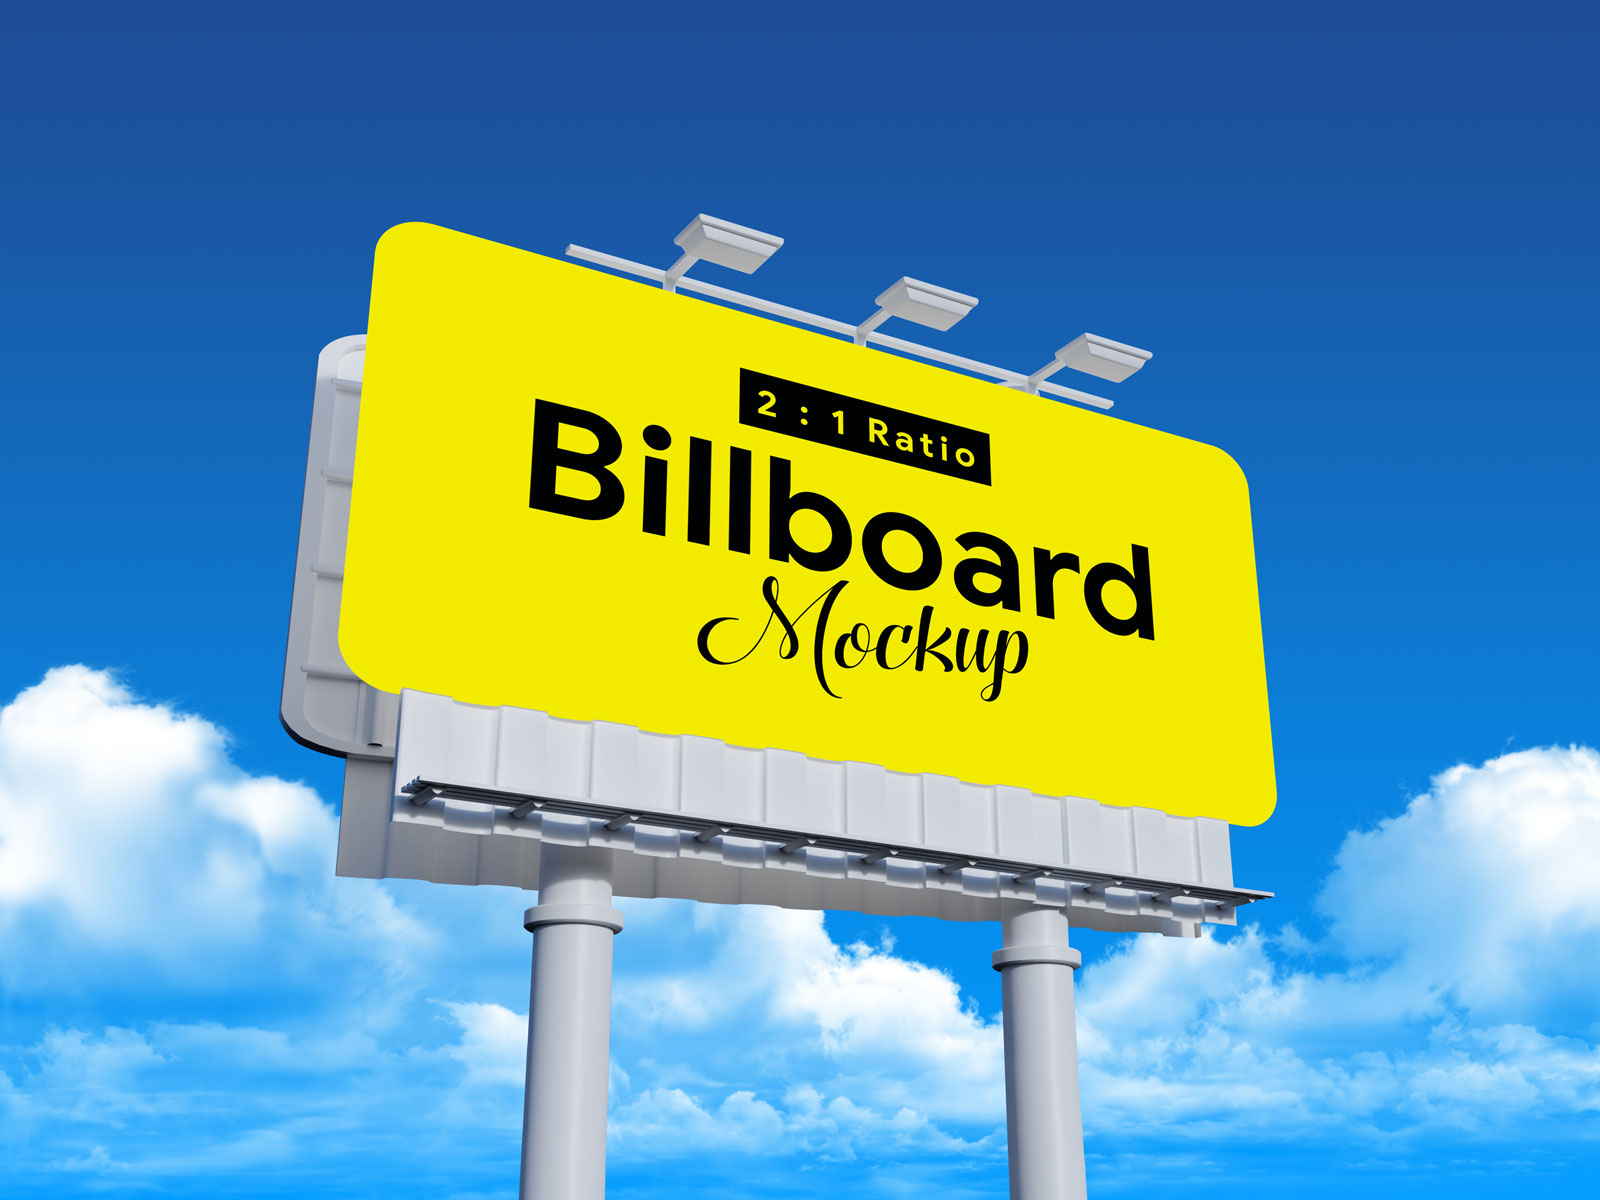 Download Free 2 1 Outdoor Advertising Rounded Corners Billboard Mockup Psd Designbolts